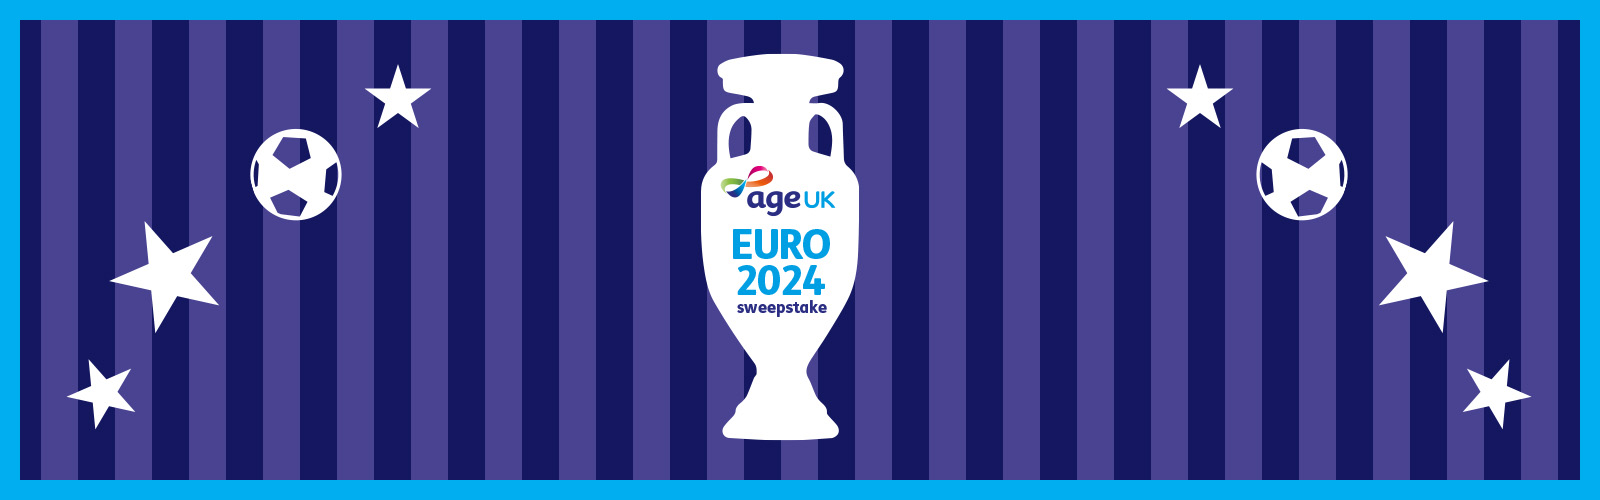 An illustration of the Euro 2024 trophy